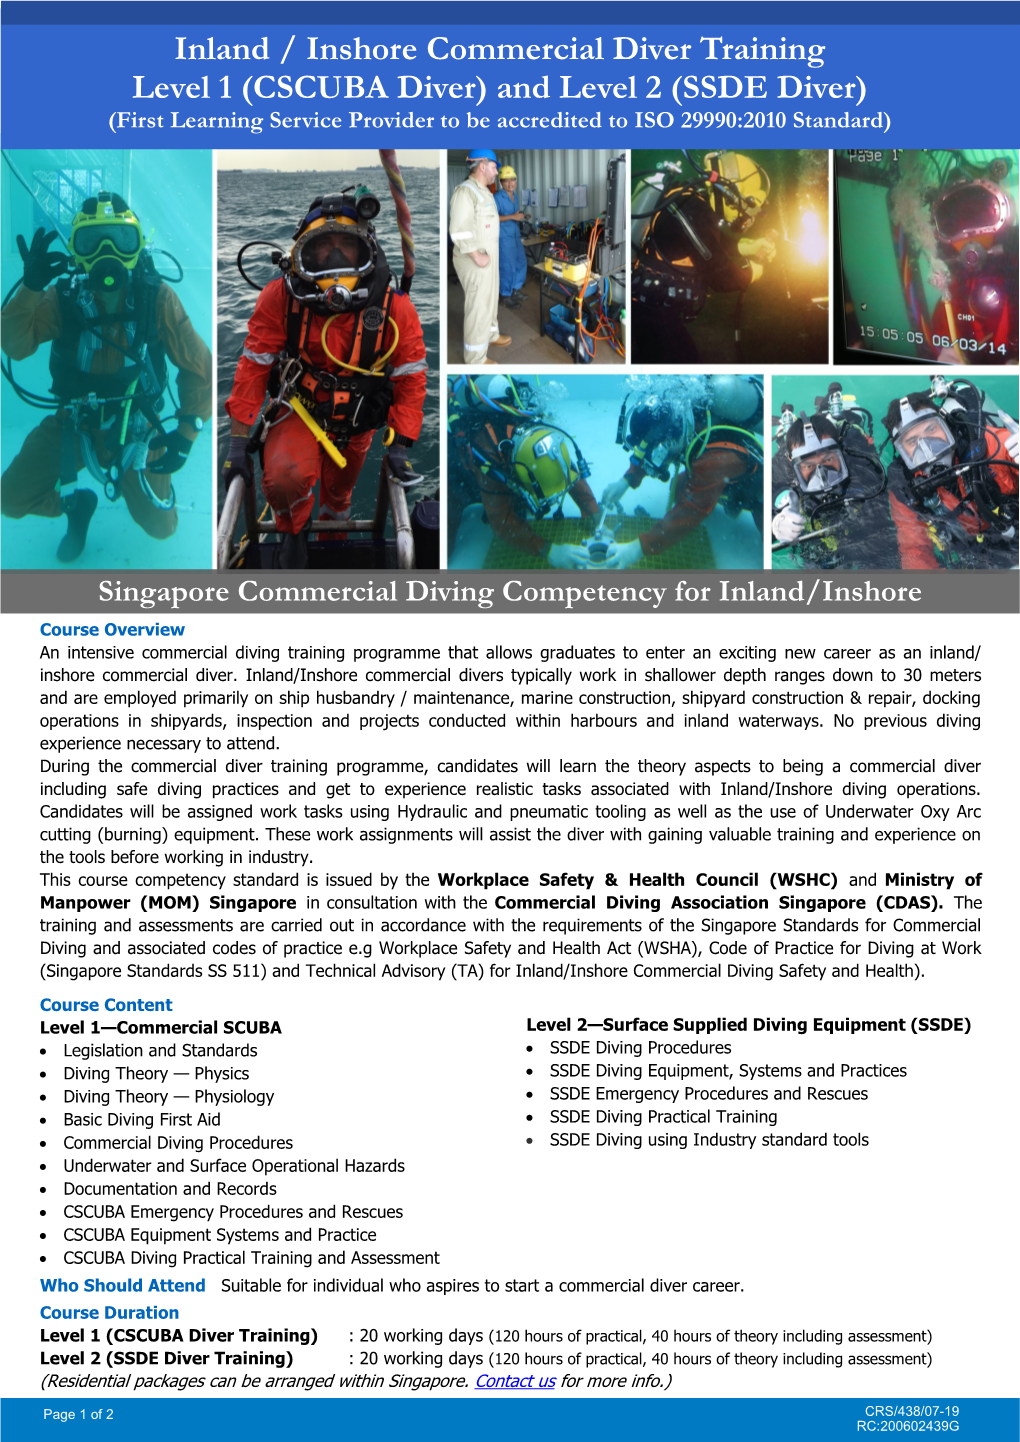 Inland / Inshore Commercial Diver Training Level 1